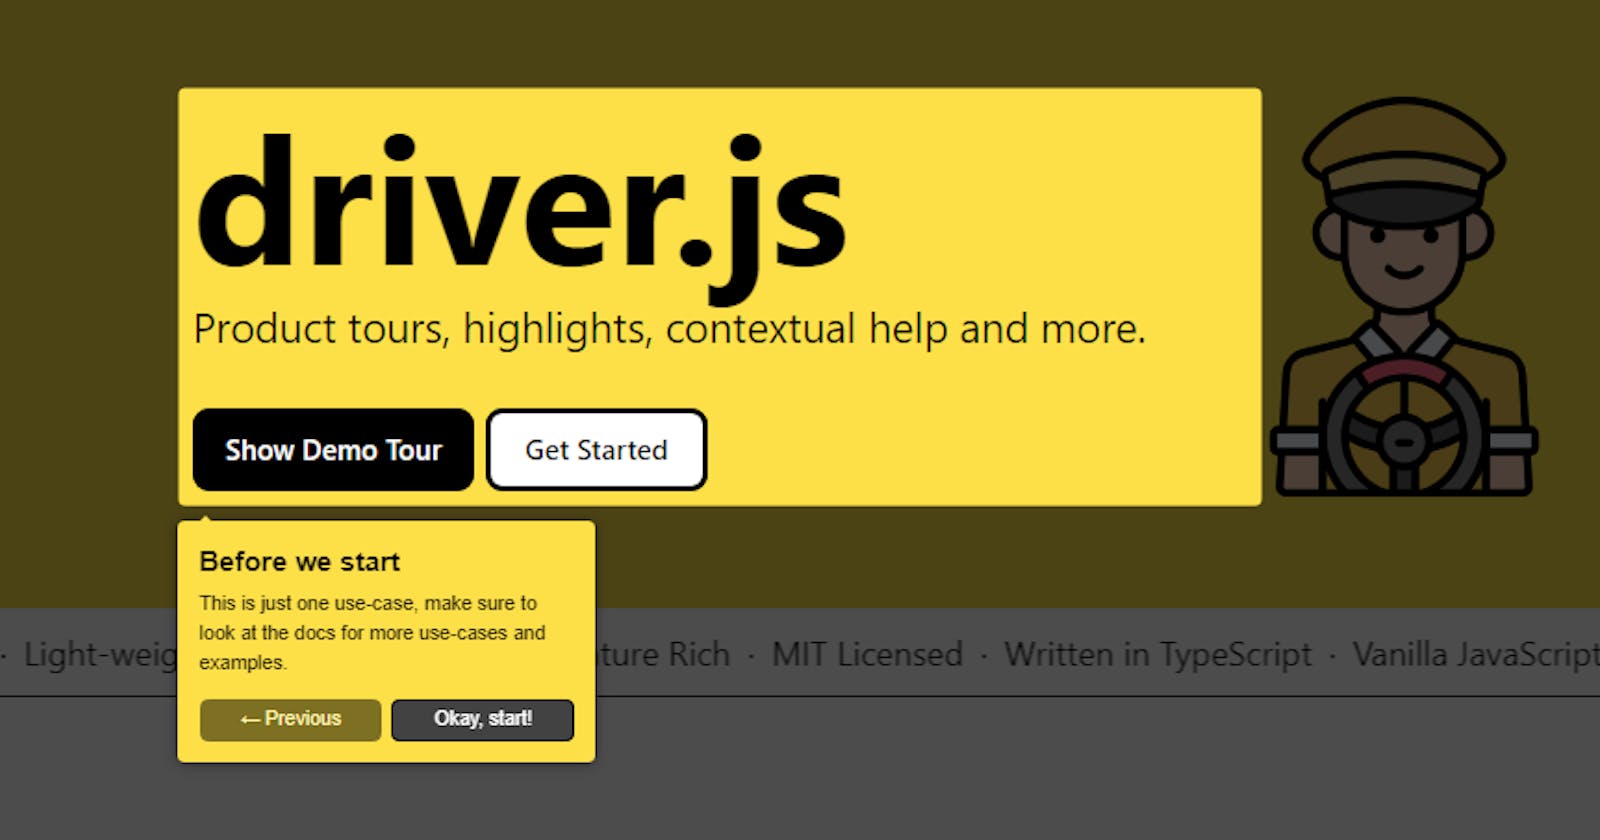 Enhancing User Experience with Guided Tours in web Applications: [driver.js]